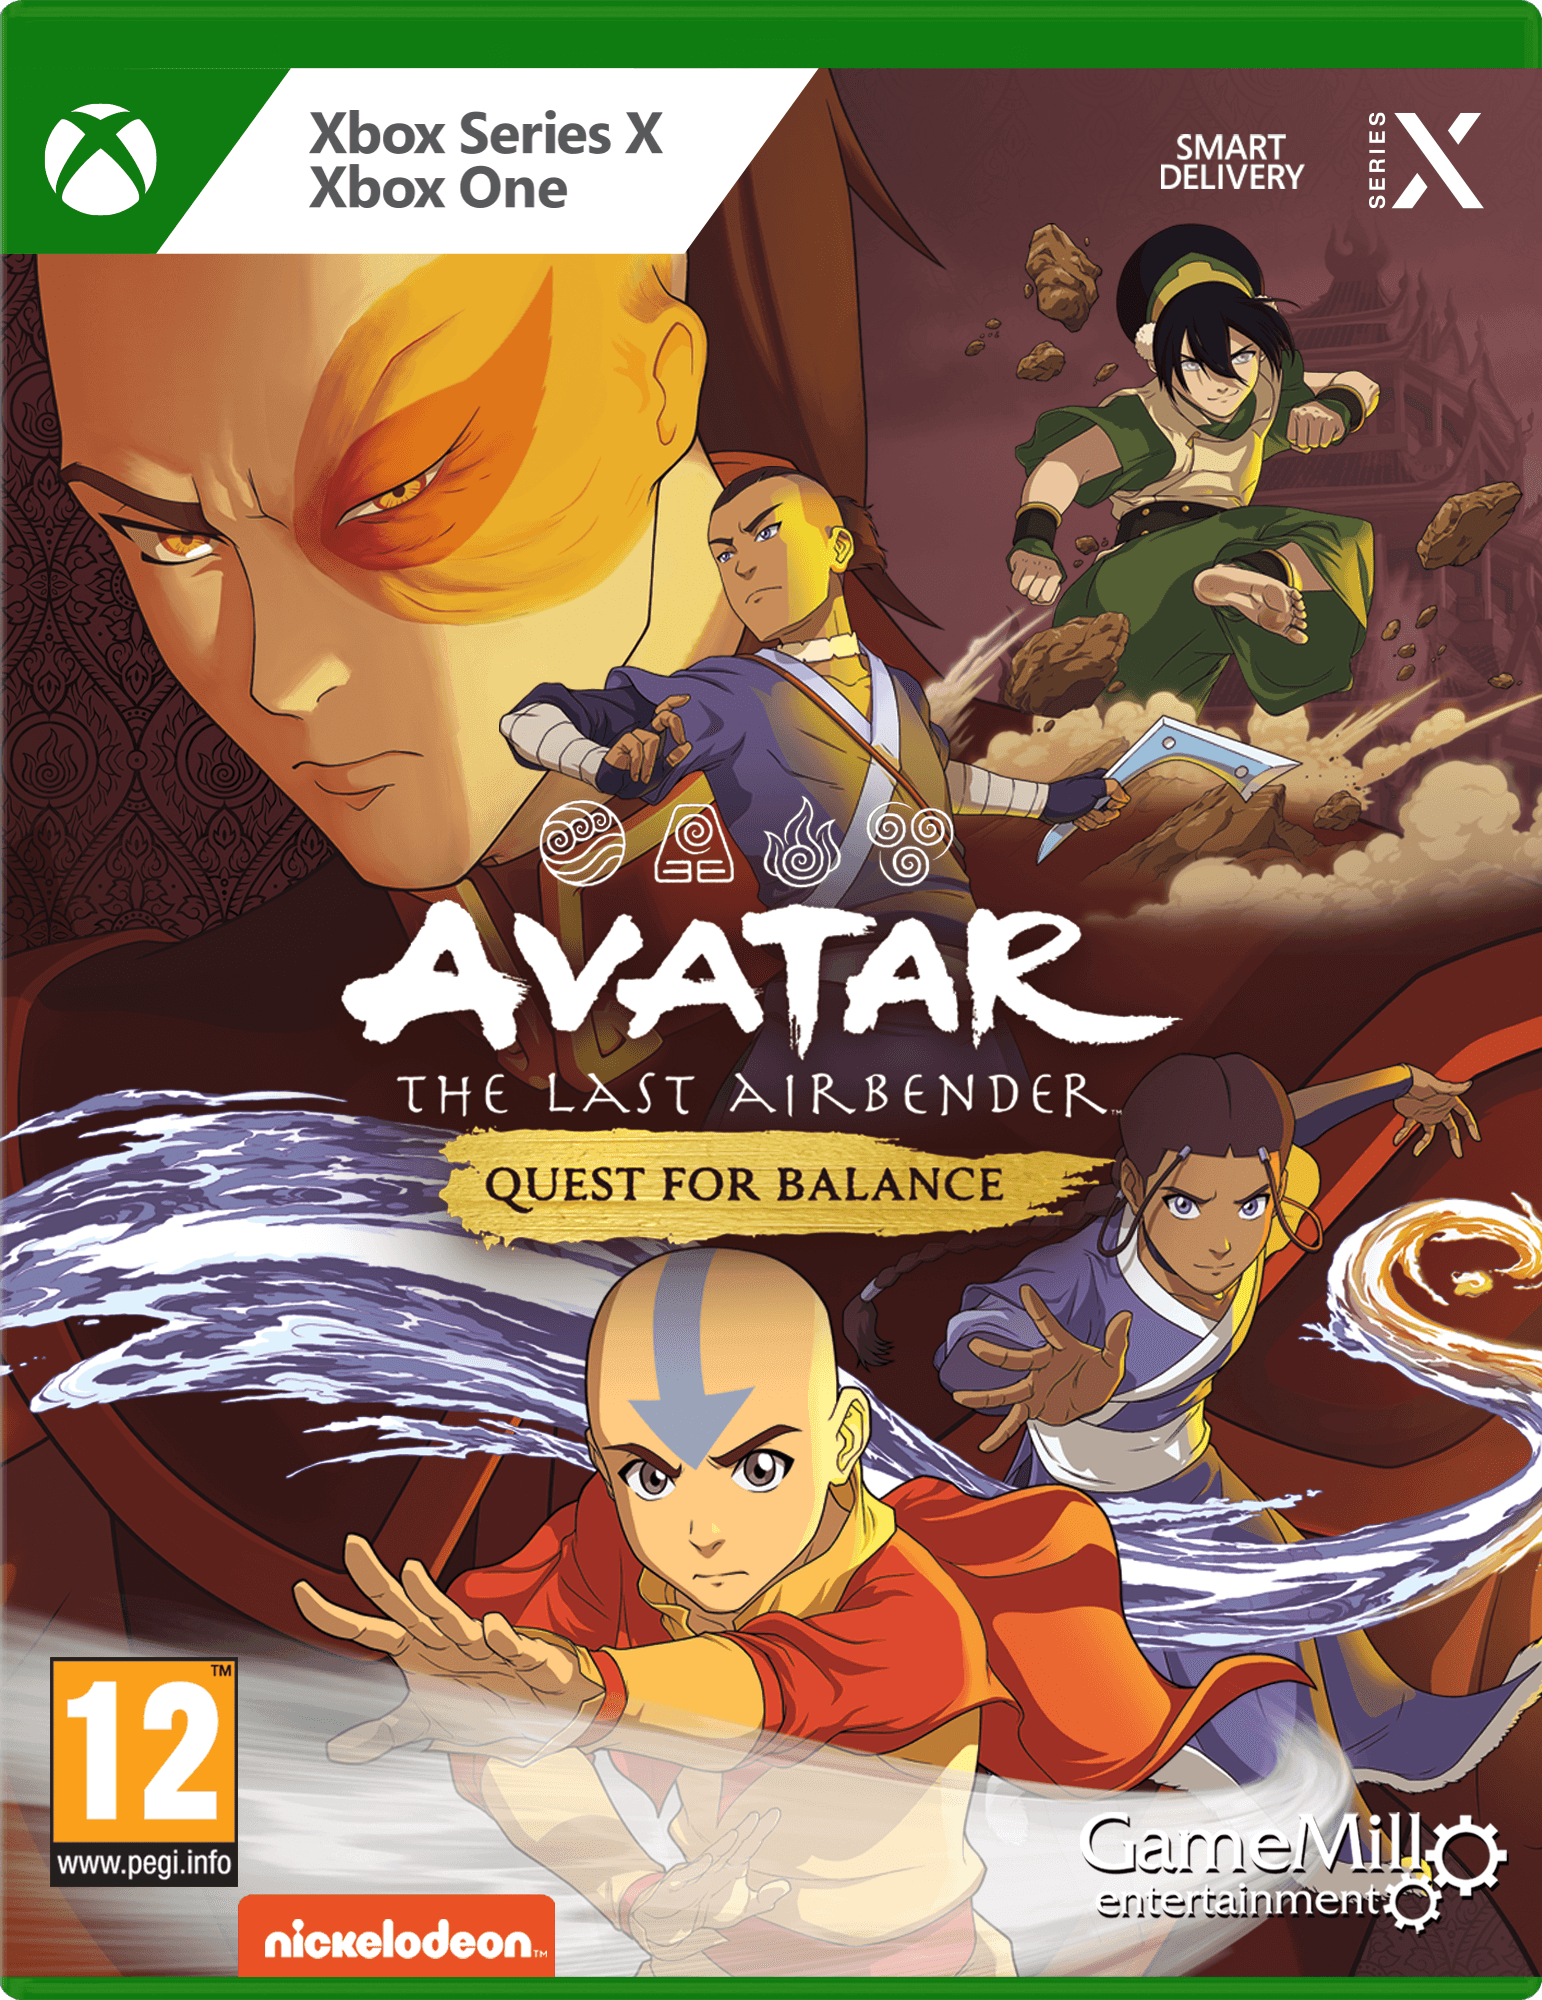 Avatar The Last Airbender Quest for Balance - Want a New Gadget